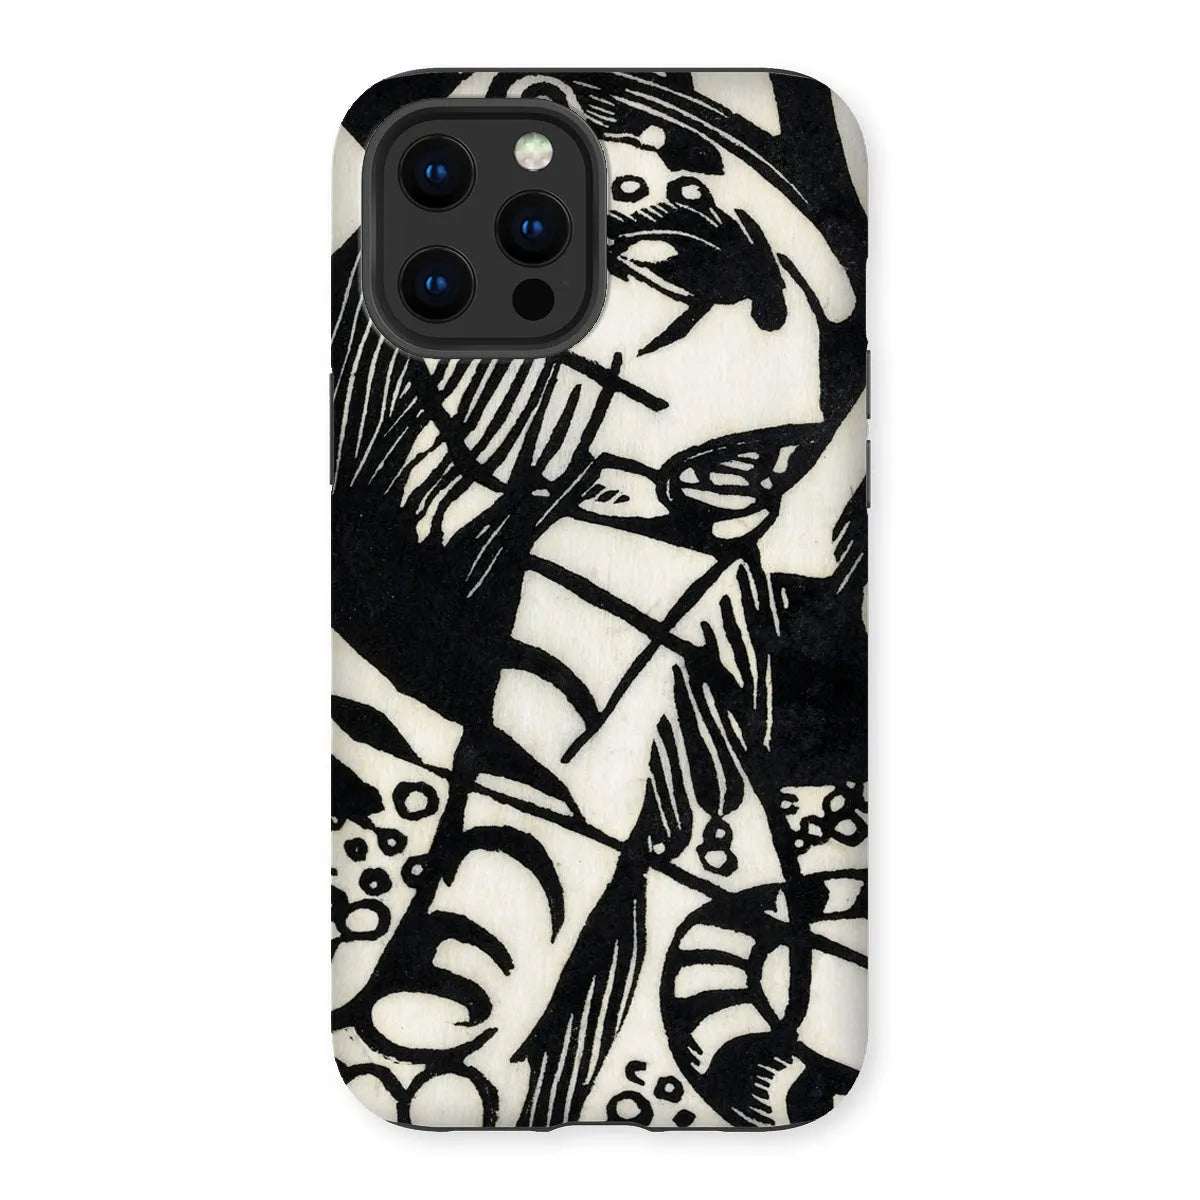 Tiger - Animal Aesthetic Phone Case - Franz Marc - Iphone 12 Pro Max / Matte - Mobile Phone Cases - Aesthetic Art